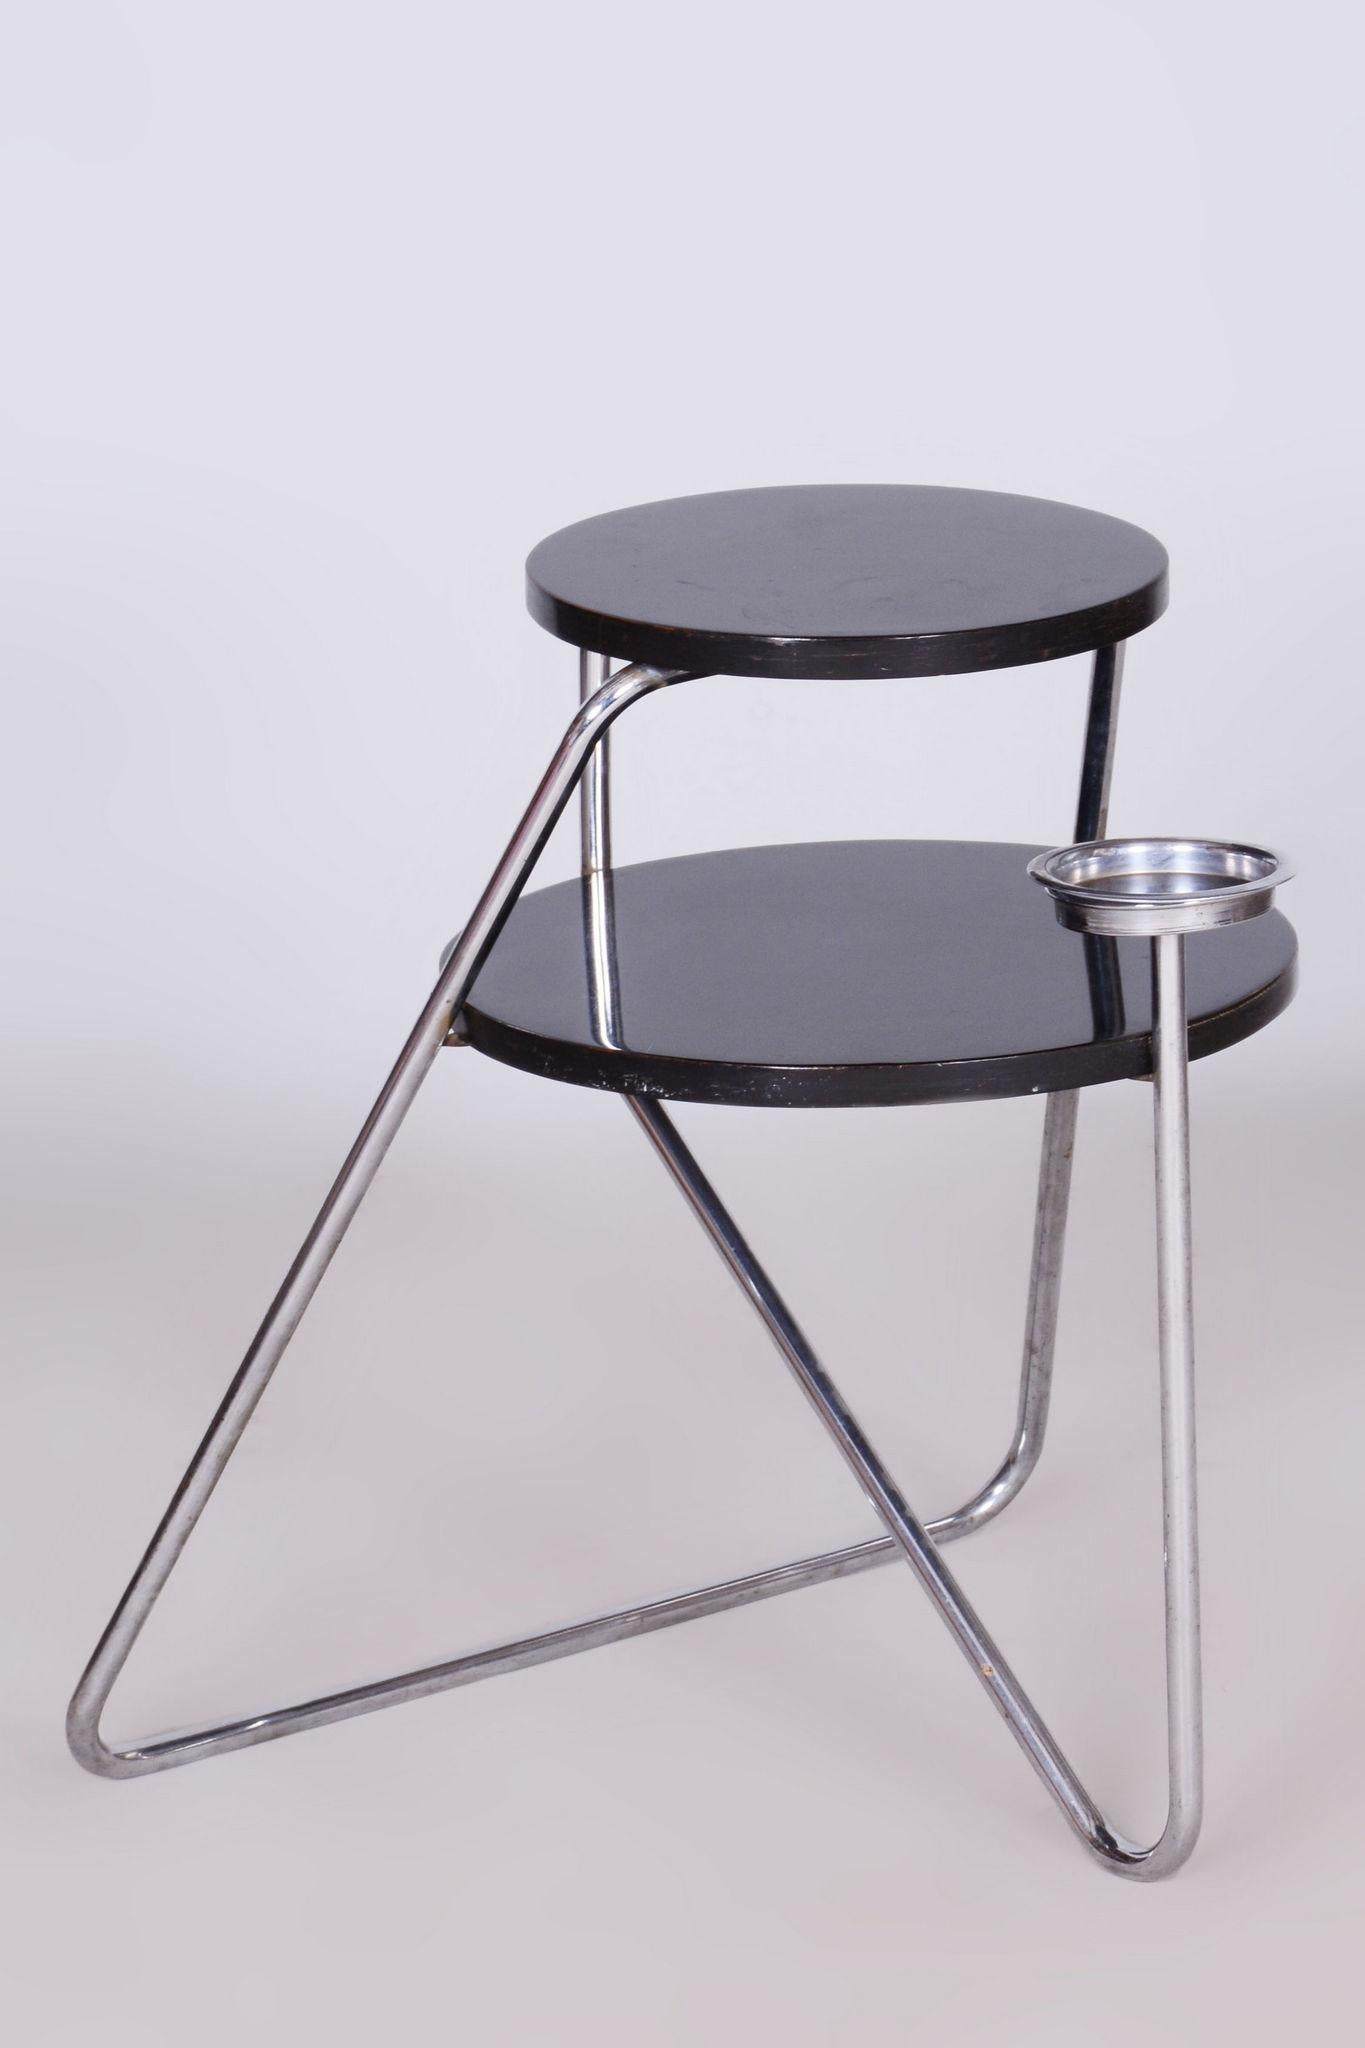 Restored Bauhaus Small Table, Chrome, Revived Polish, Czechia, 1930s For Sale 3